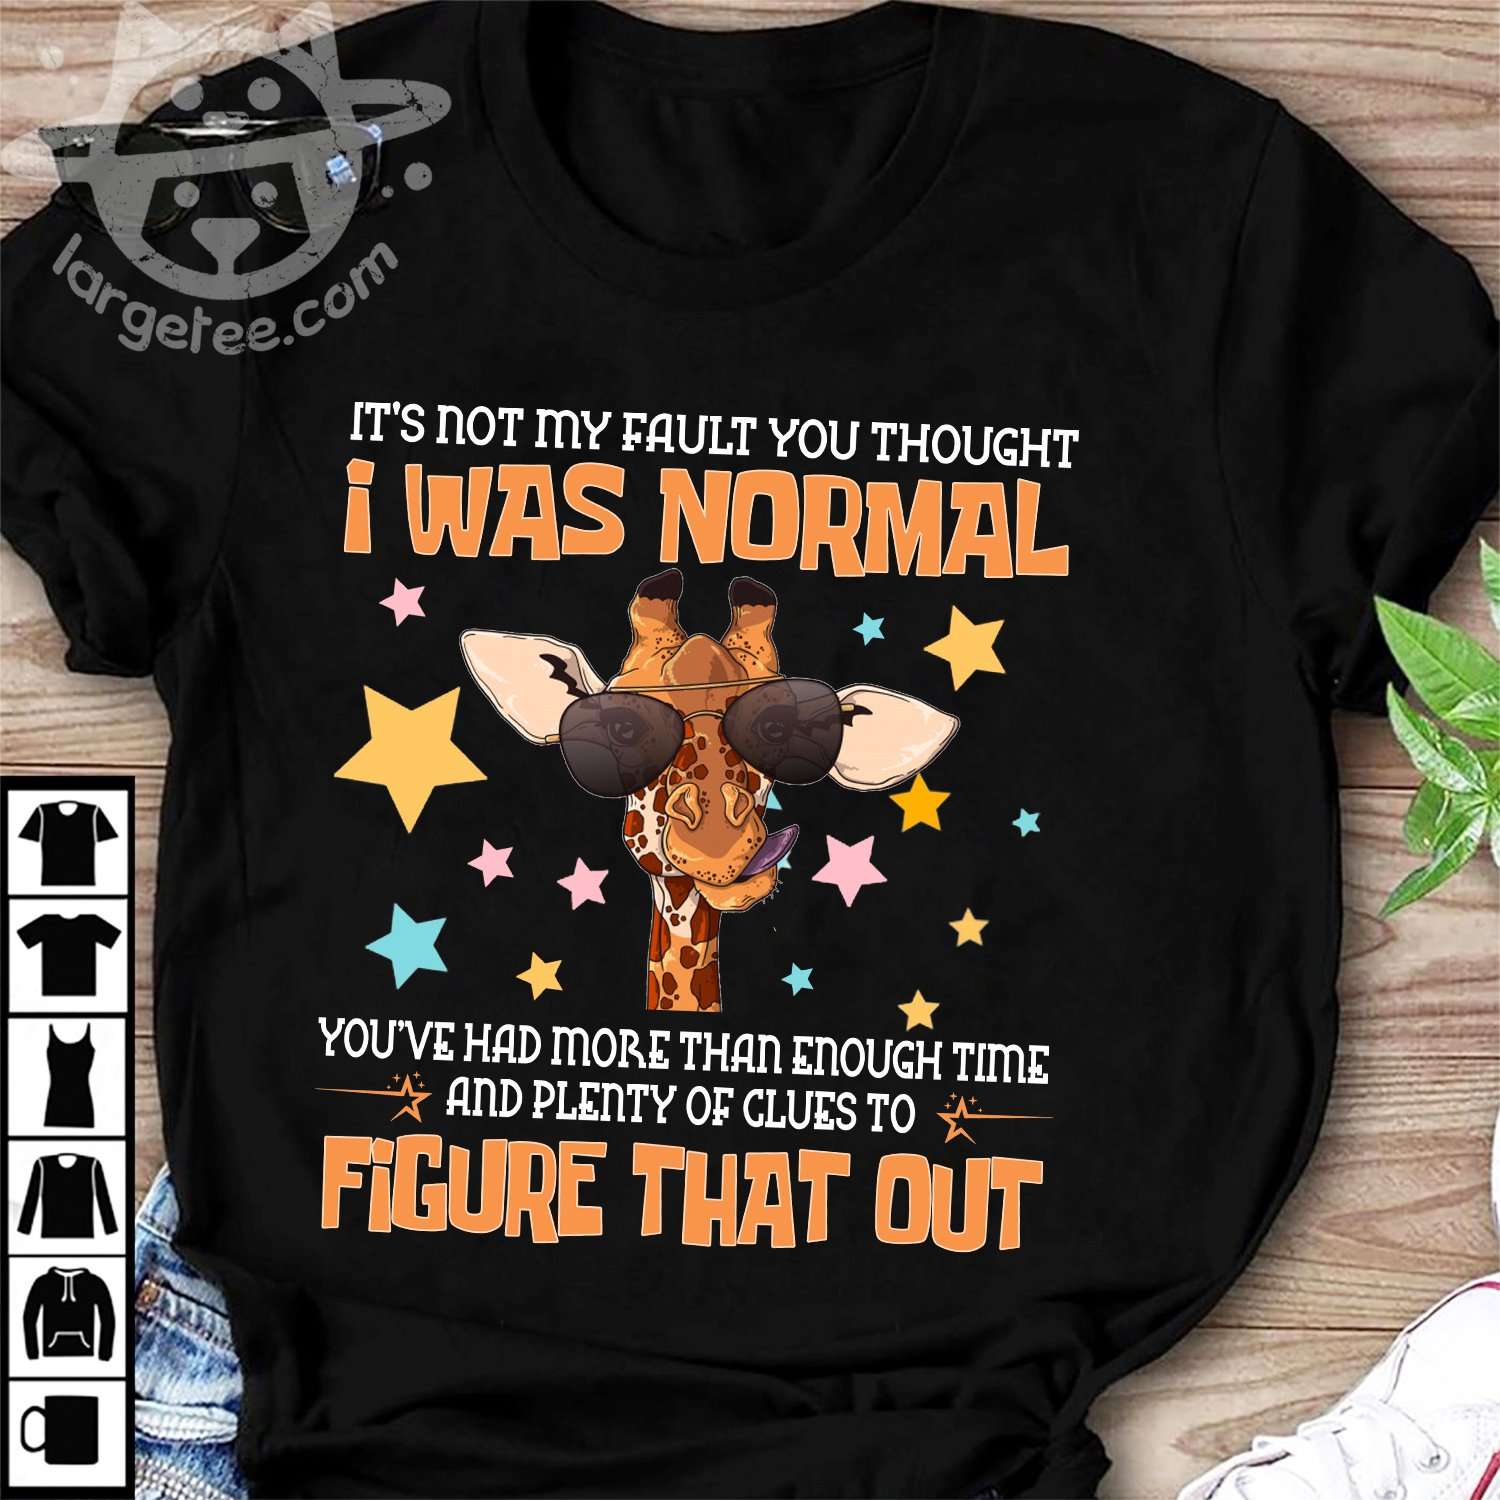 It's not my fault you thought I was normal - Grumpy crazy giraffe, giraffe lover